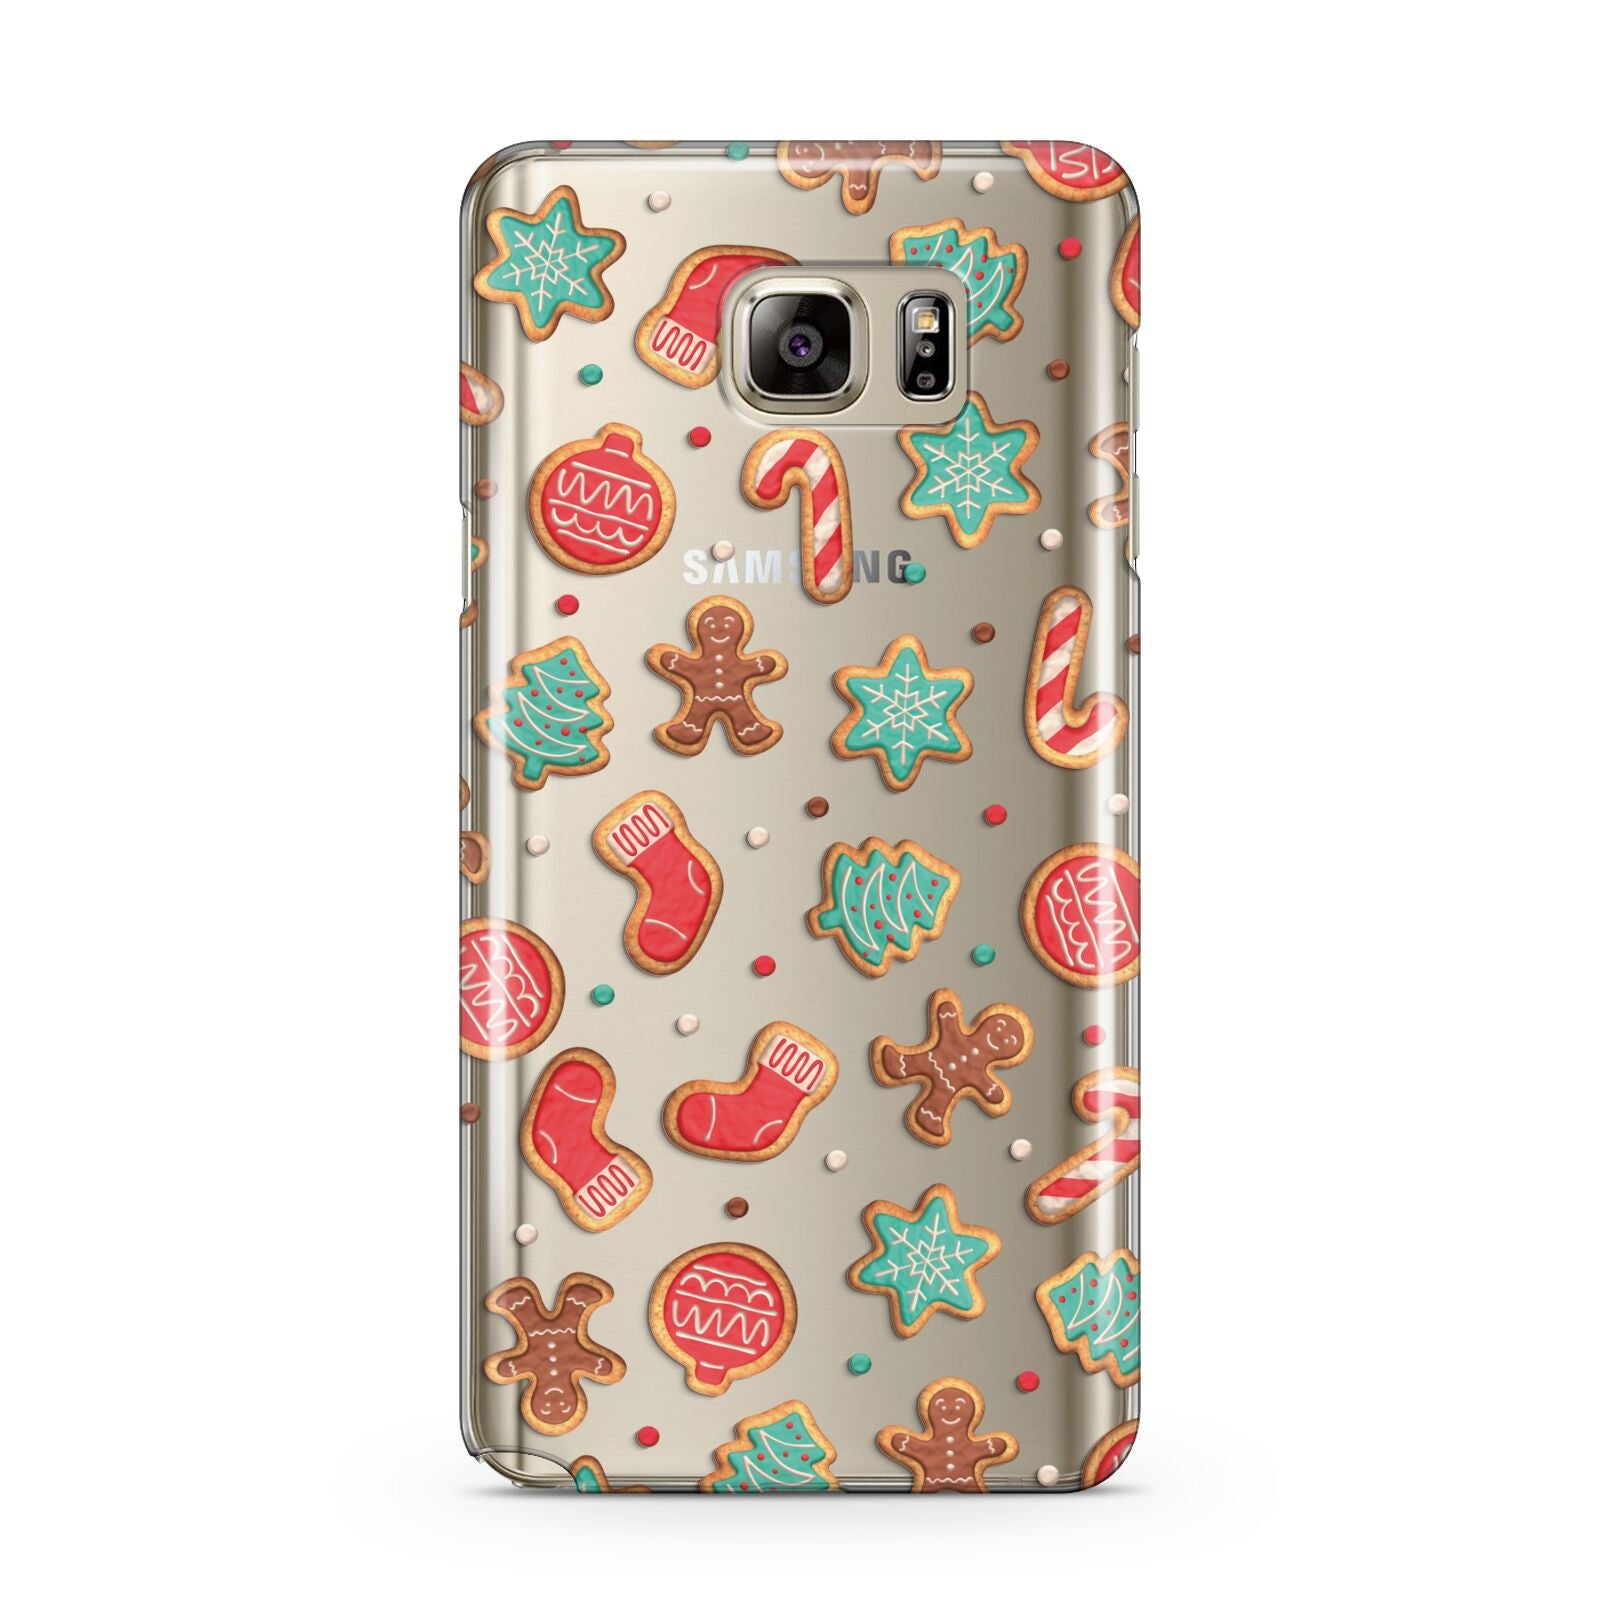 Gingerbread Christmas Samsung Galaxy Note 5 Case